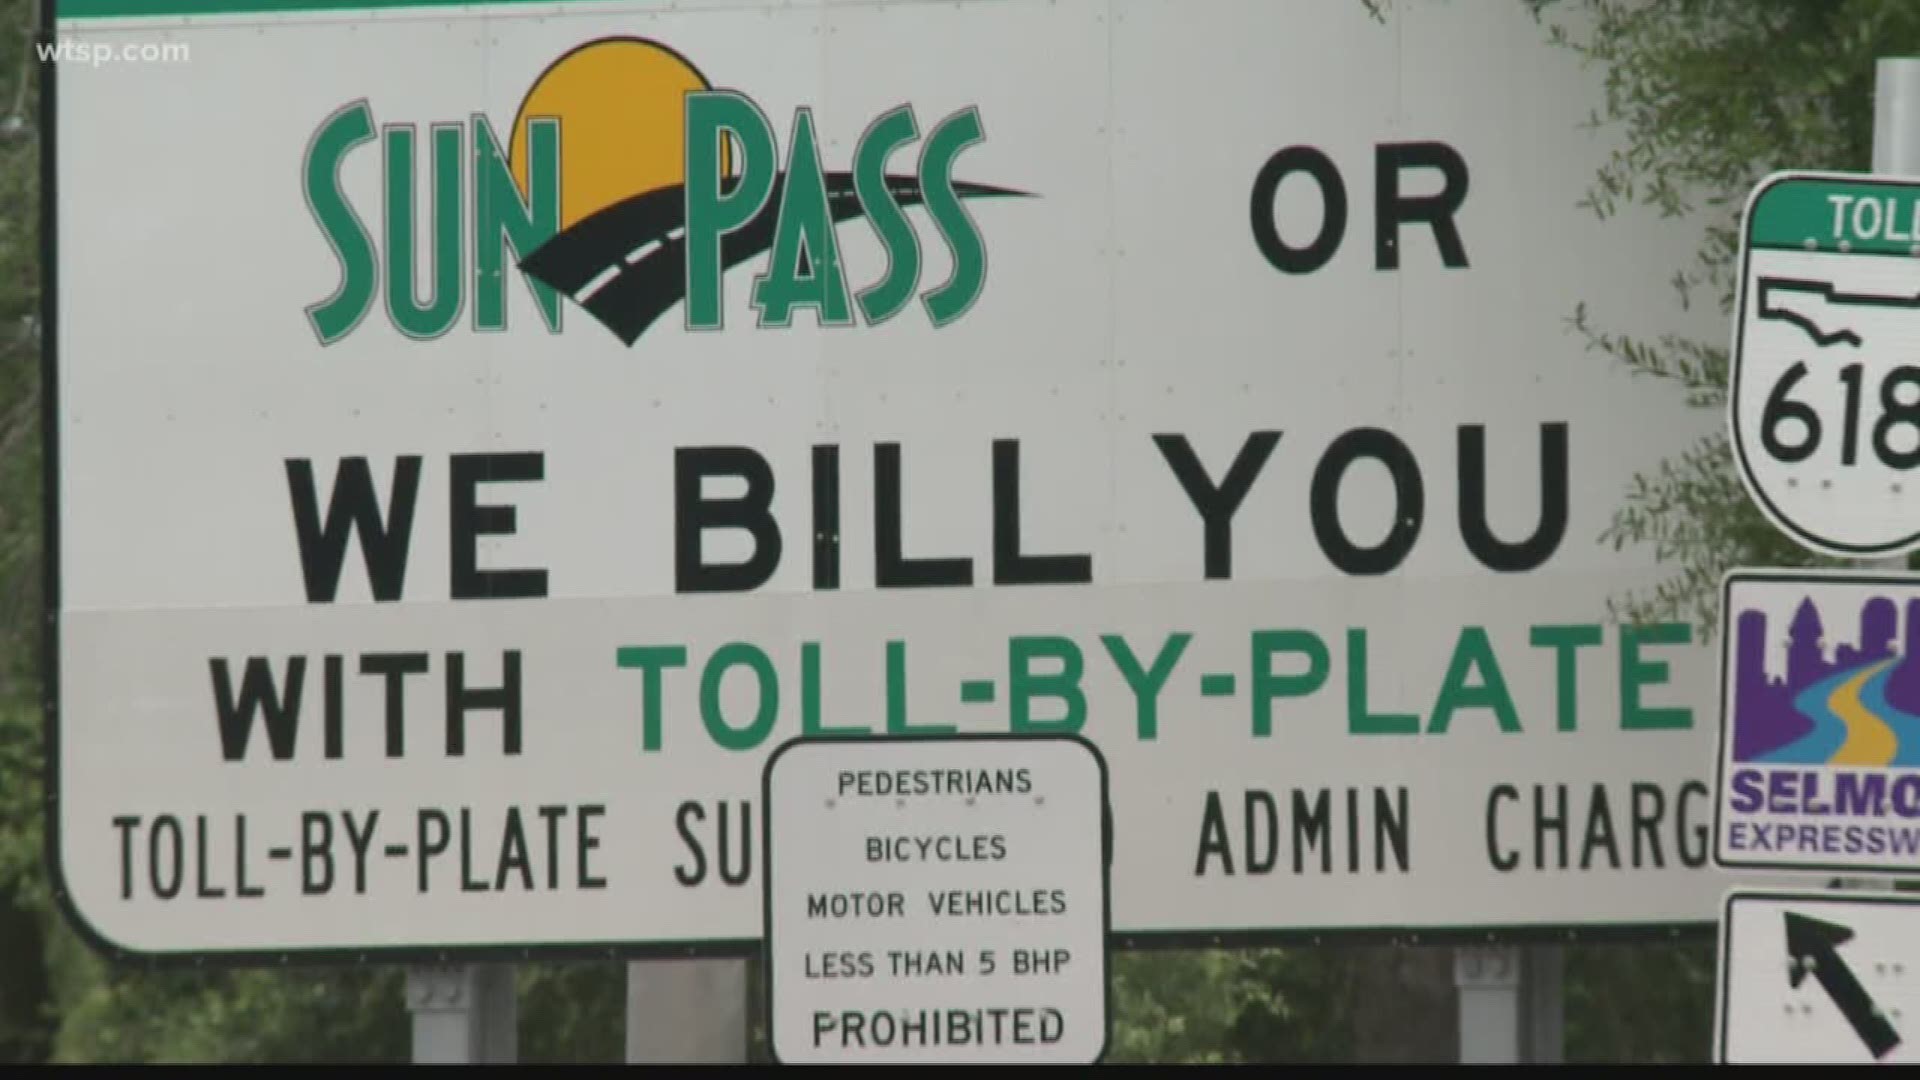 If you have a SunPass, make sure you check your balance and fill it up right now.